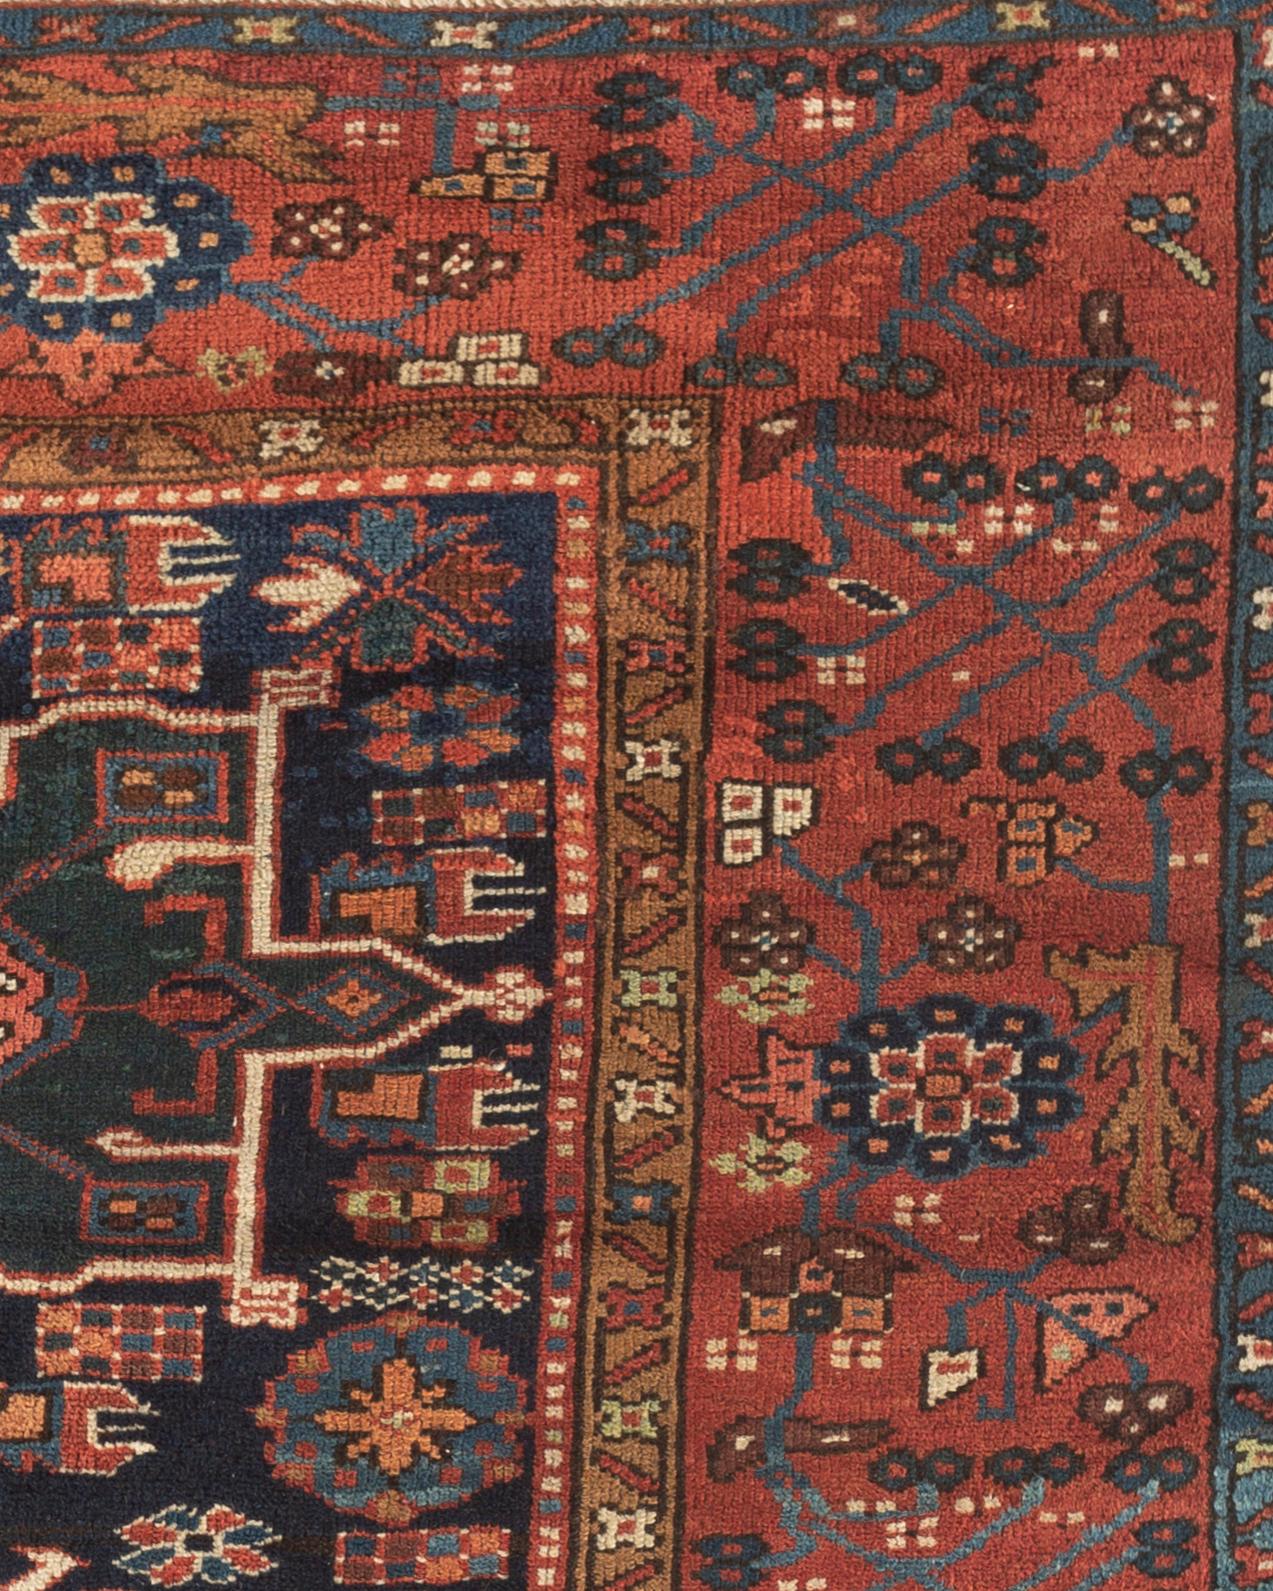 Antique Karaja rug, circa 1900. Antique Karaja (Black Mountain) rugs are woven near the Caucasian border and partake of Caucasian styles and motives. A rich navy blue ground from indigo is a salient characteristic which this wonderful example has